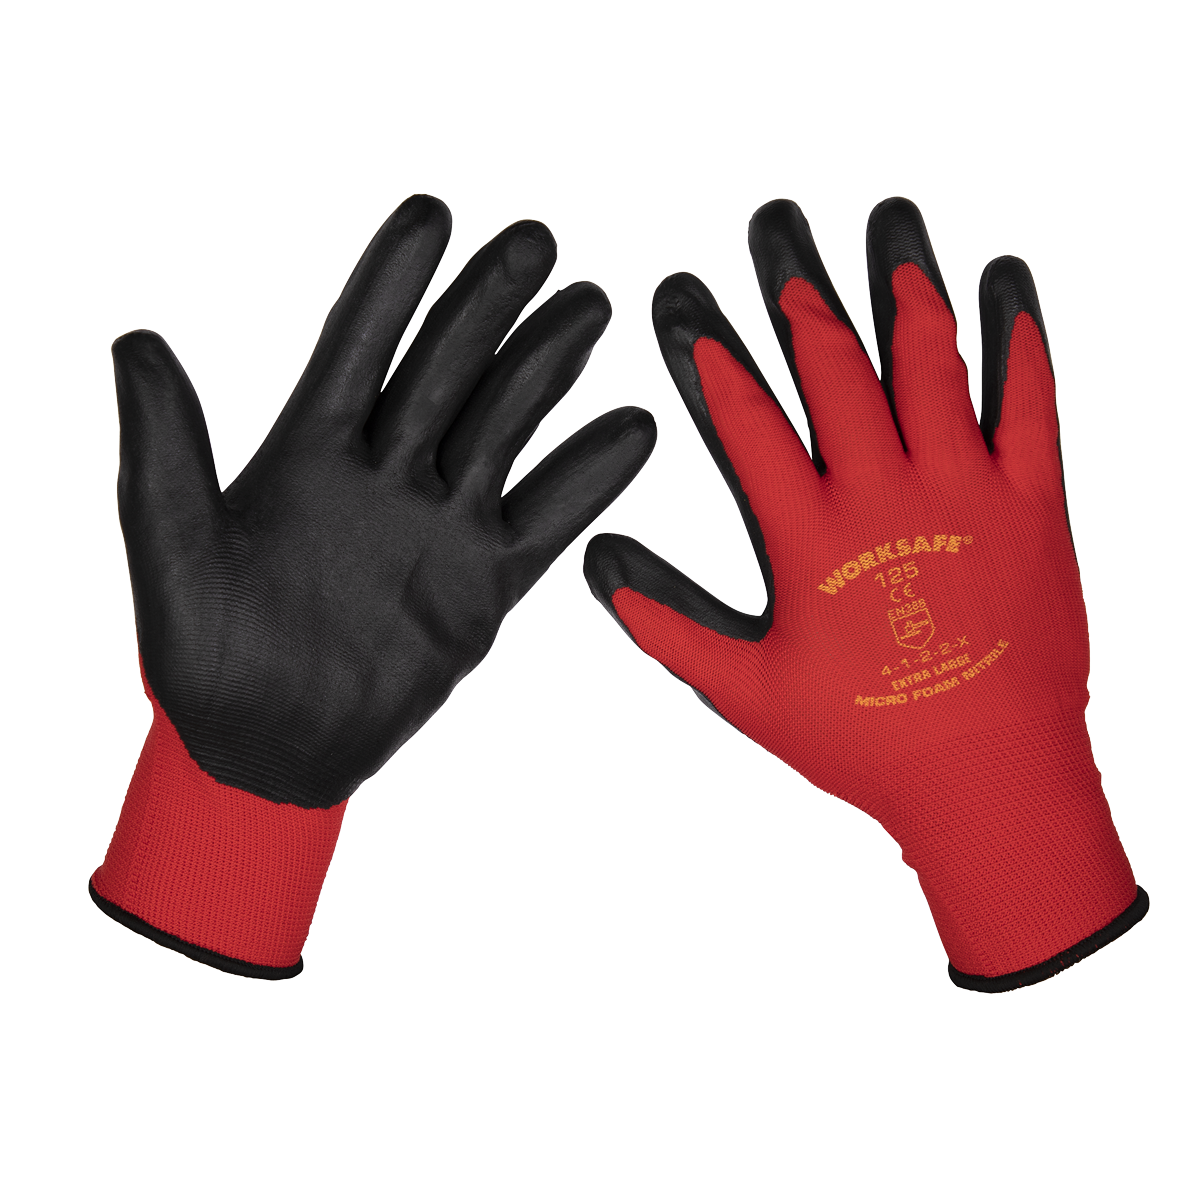 Sealey Nitrile Foam Gloves (X-Large) - Pack of 12 Pairs 9125XL/12